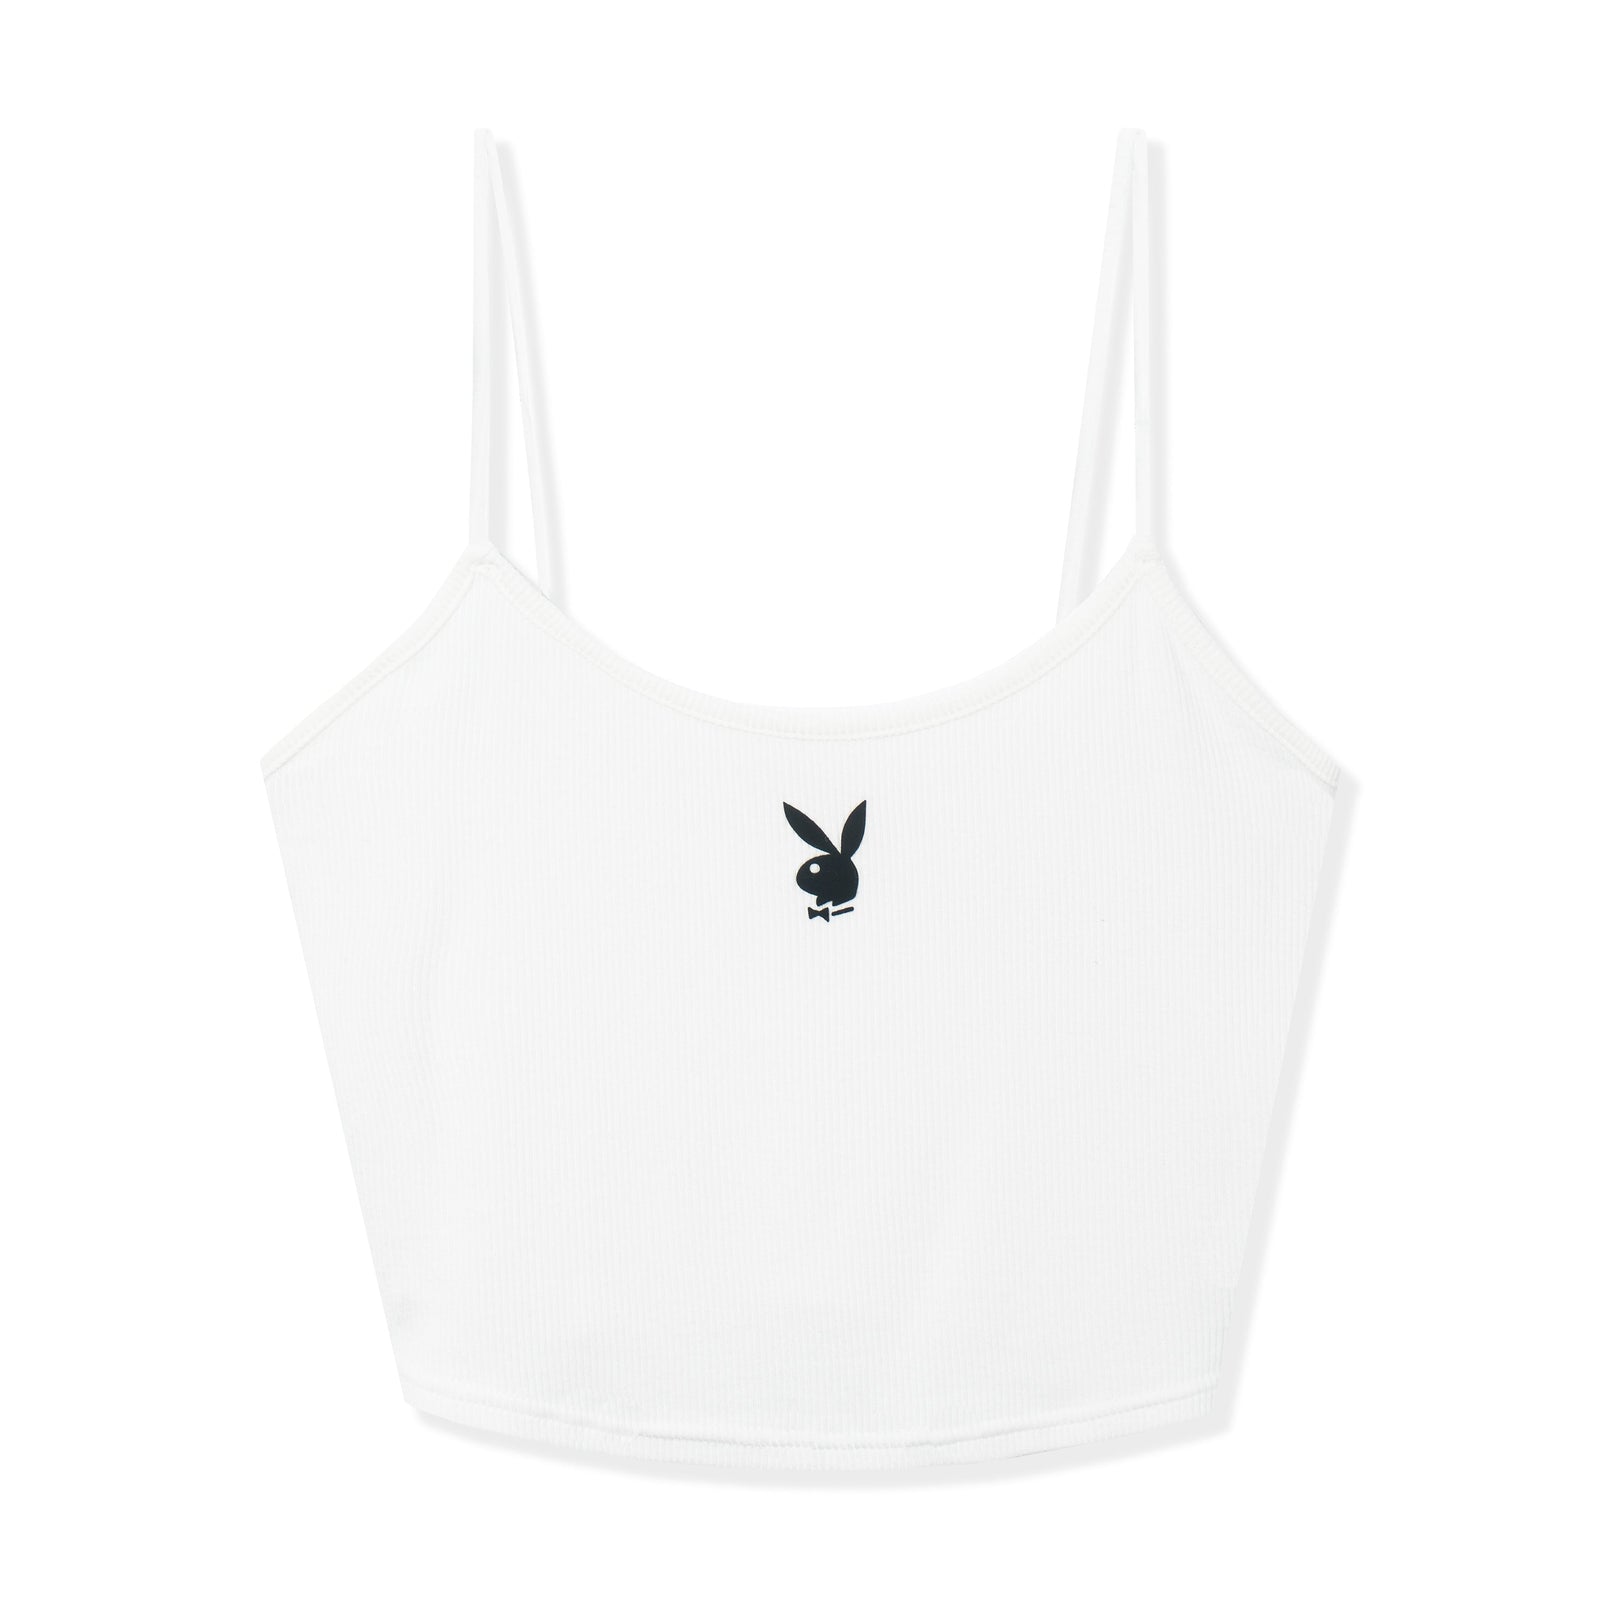 Women's White Cami Tank Top: Chic Cropped Design by Playboy